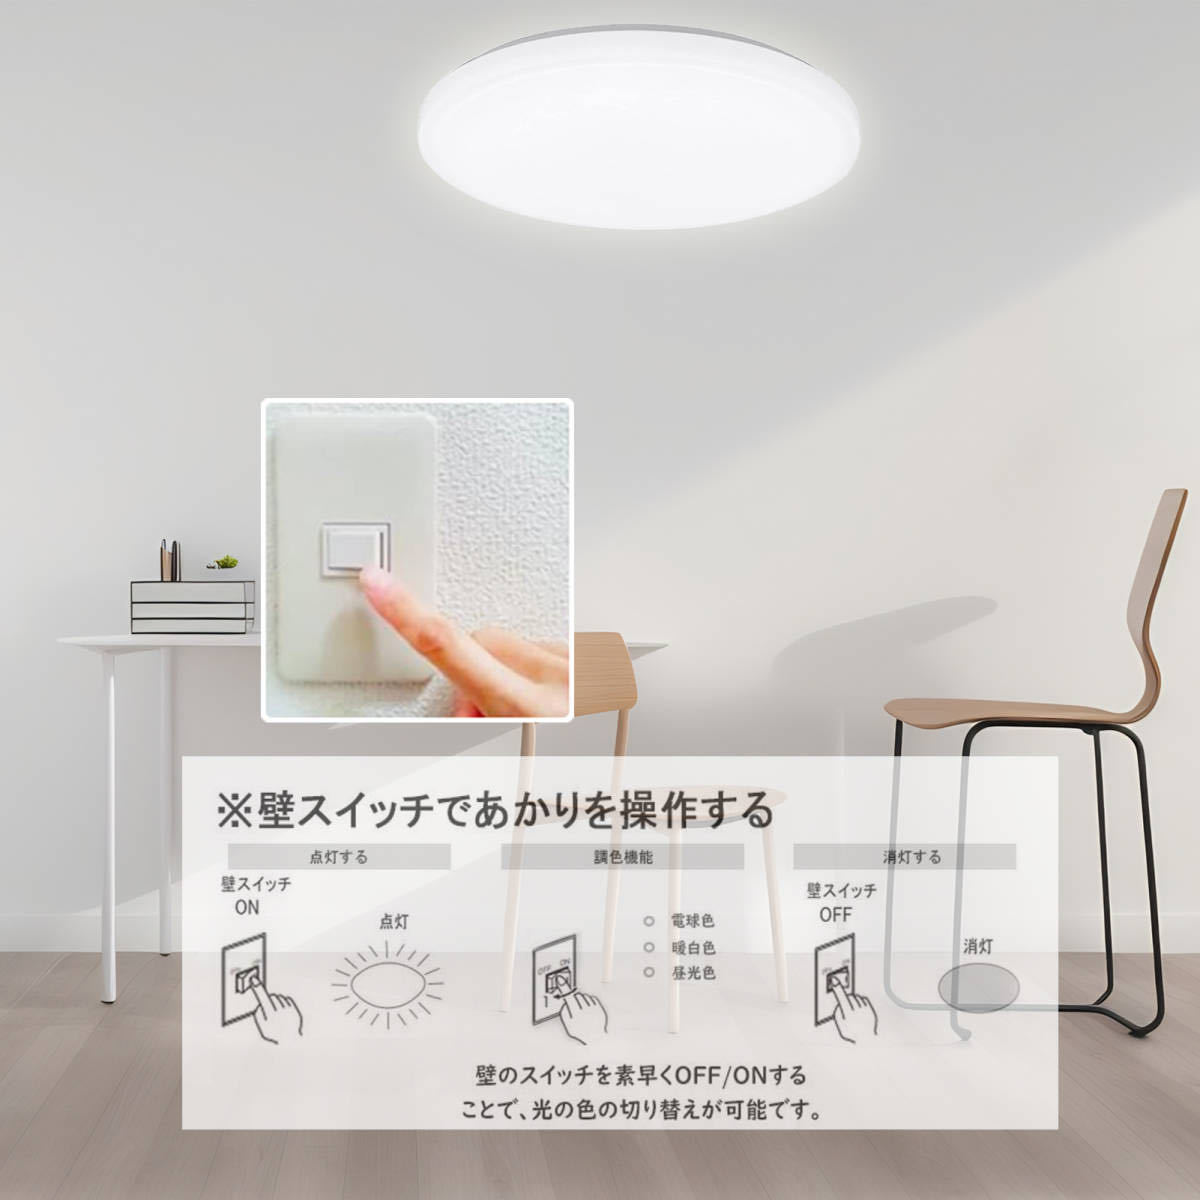 [ thin type . electro- ]LED ceiling light 6 tatami 20W lighting equipment high-quality ceiling lighting 2200LM ceiling interior lighting remote control none energy conservation 2 piece set collection 